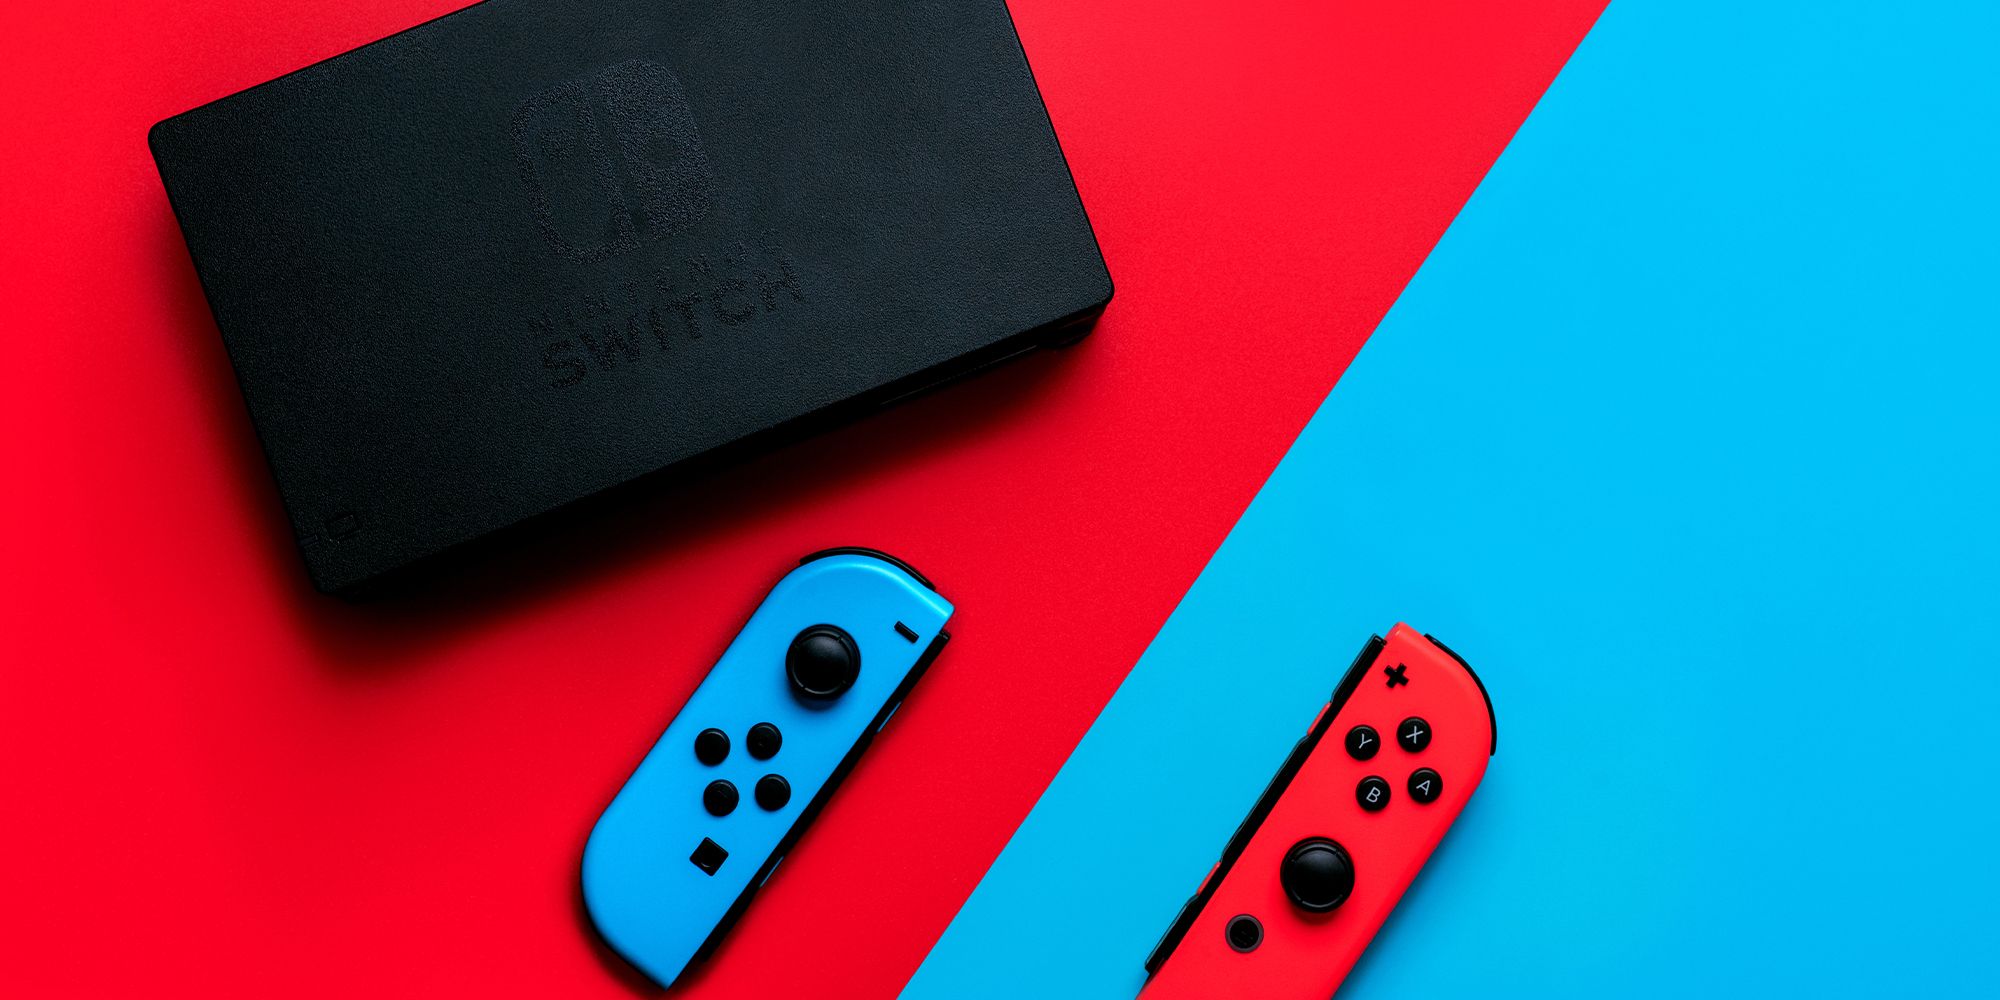 Nintendo Switch dock on the left, over a red slanted background, with the blue joy-con, while the red joy-con is on the right side over a blue-slanted background